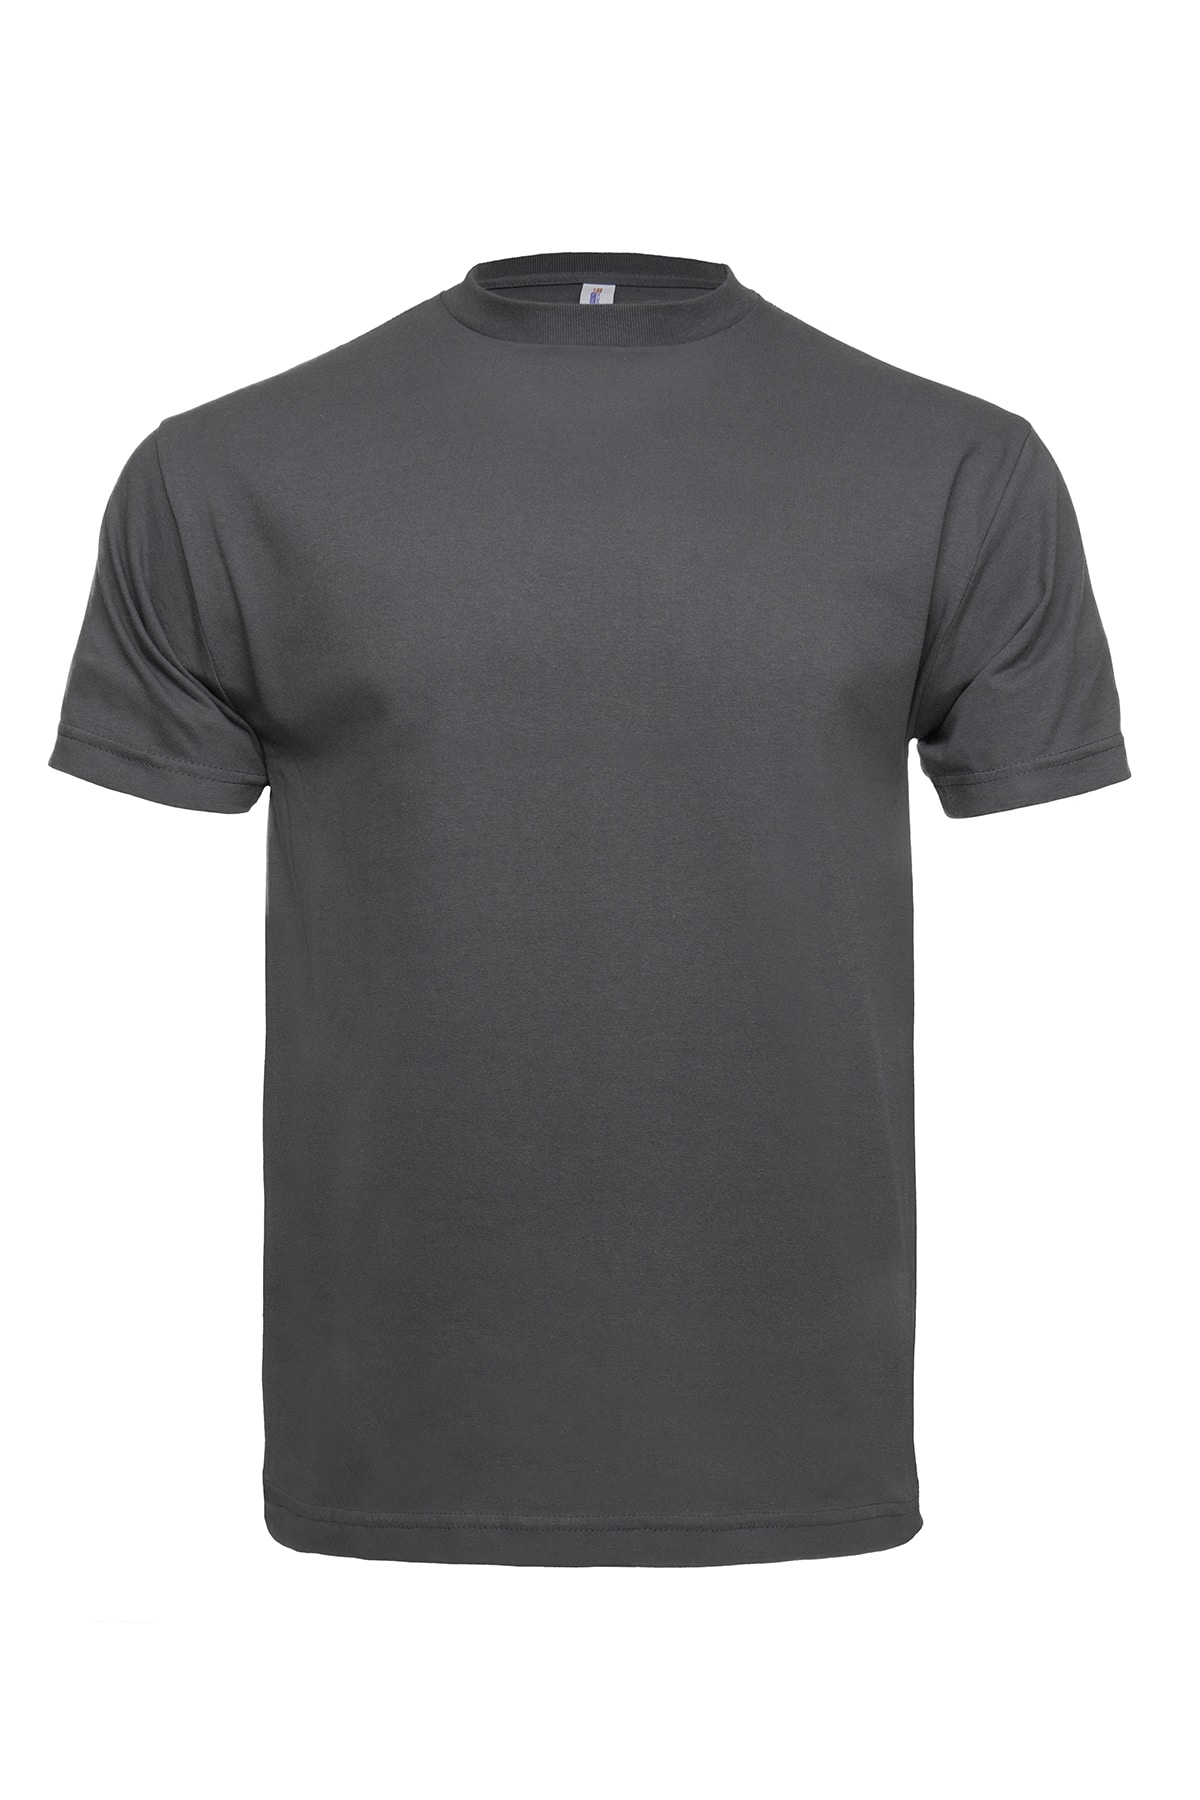 1301 Charcoal Front T-shirt